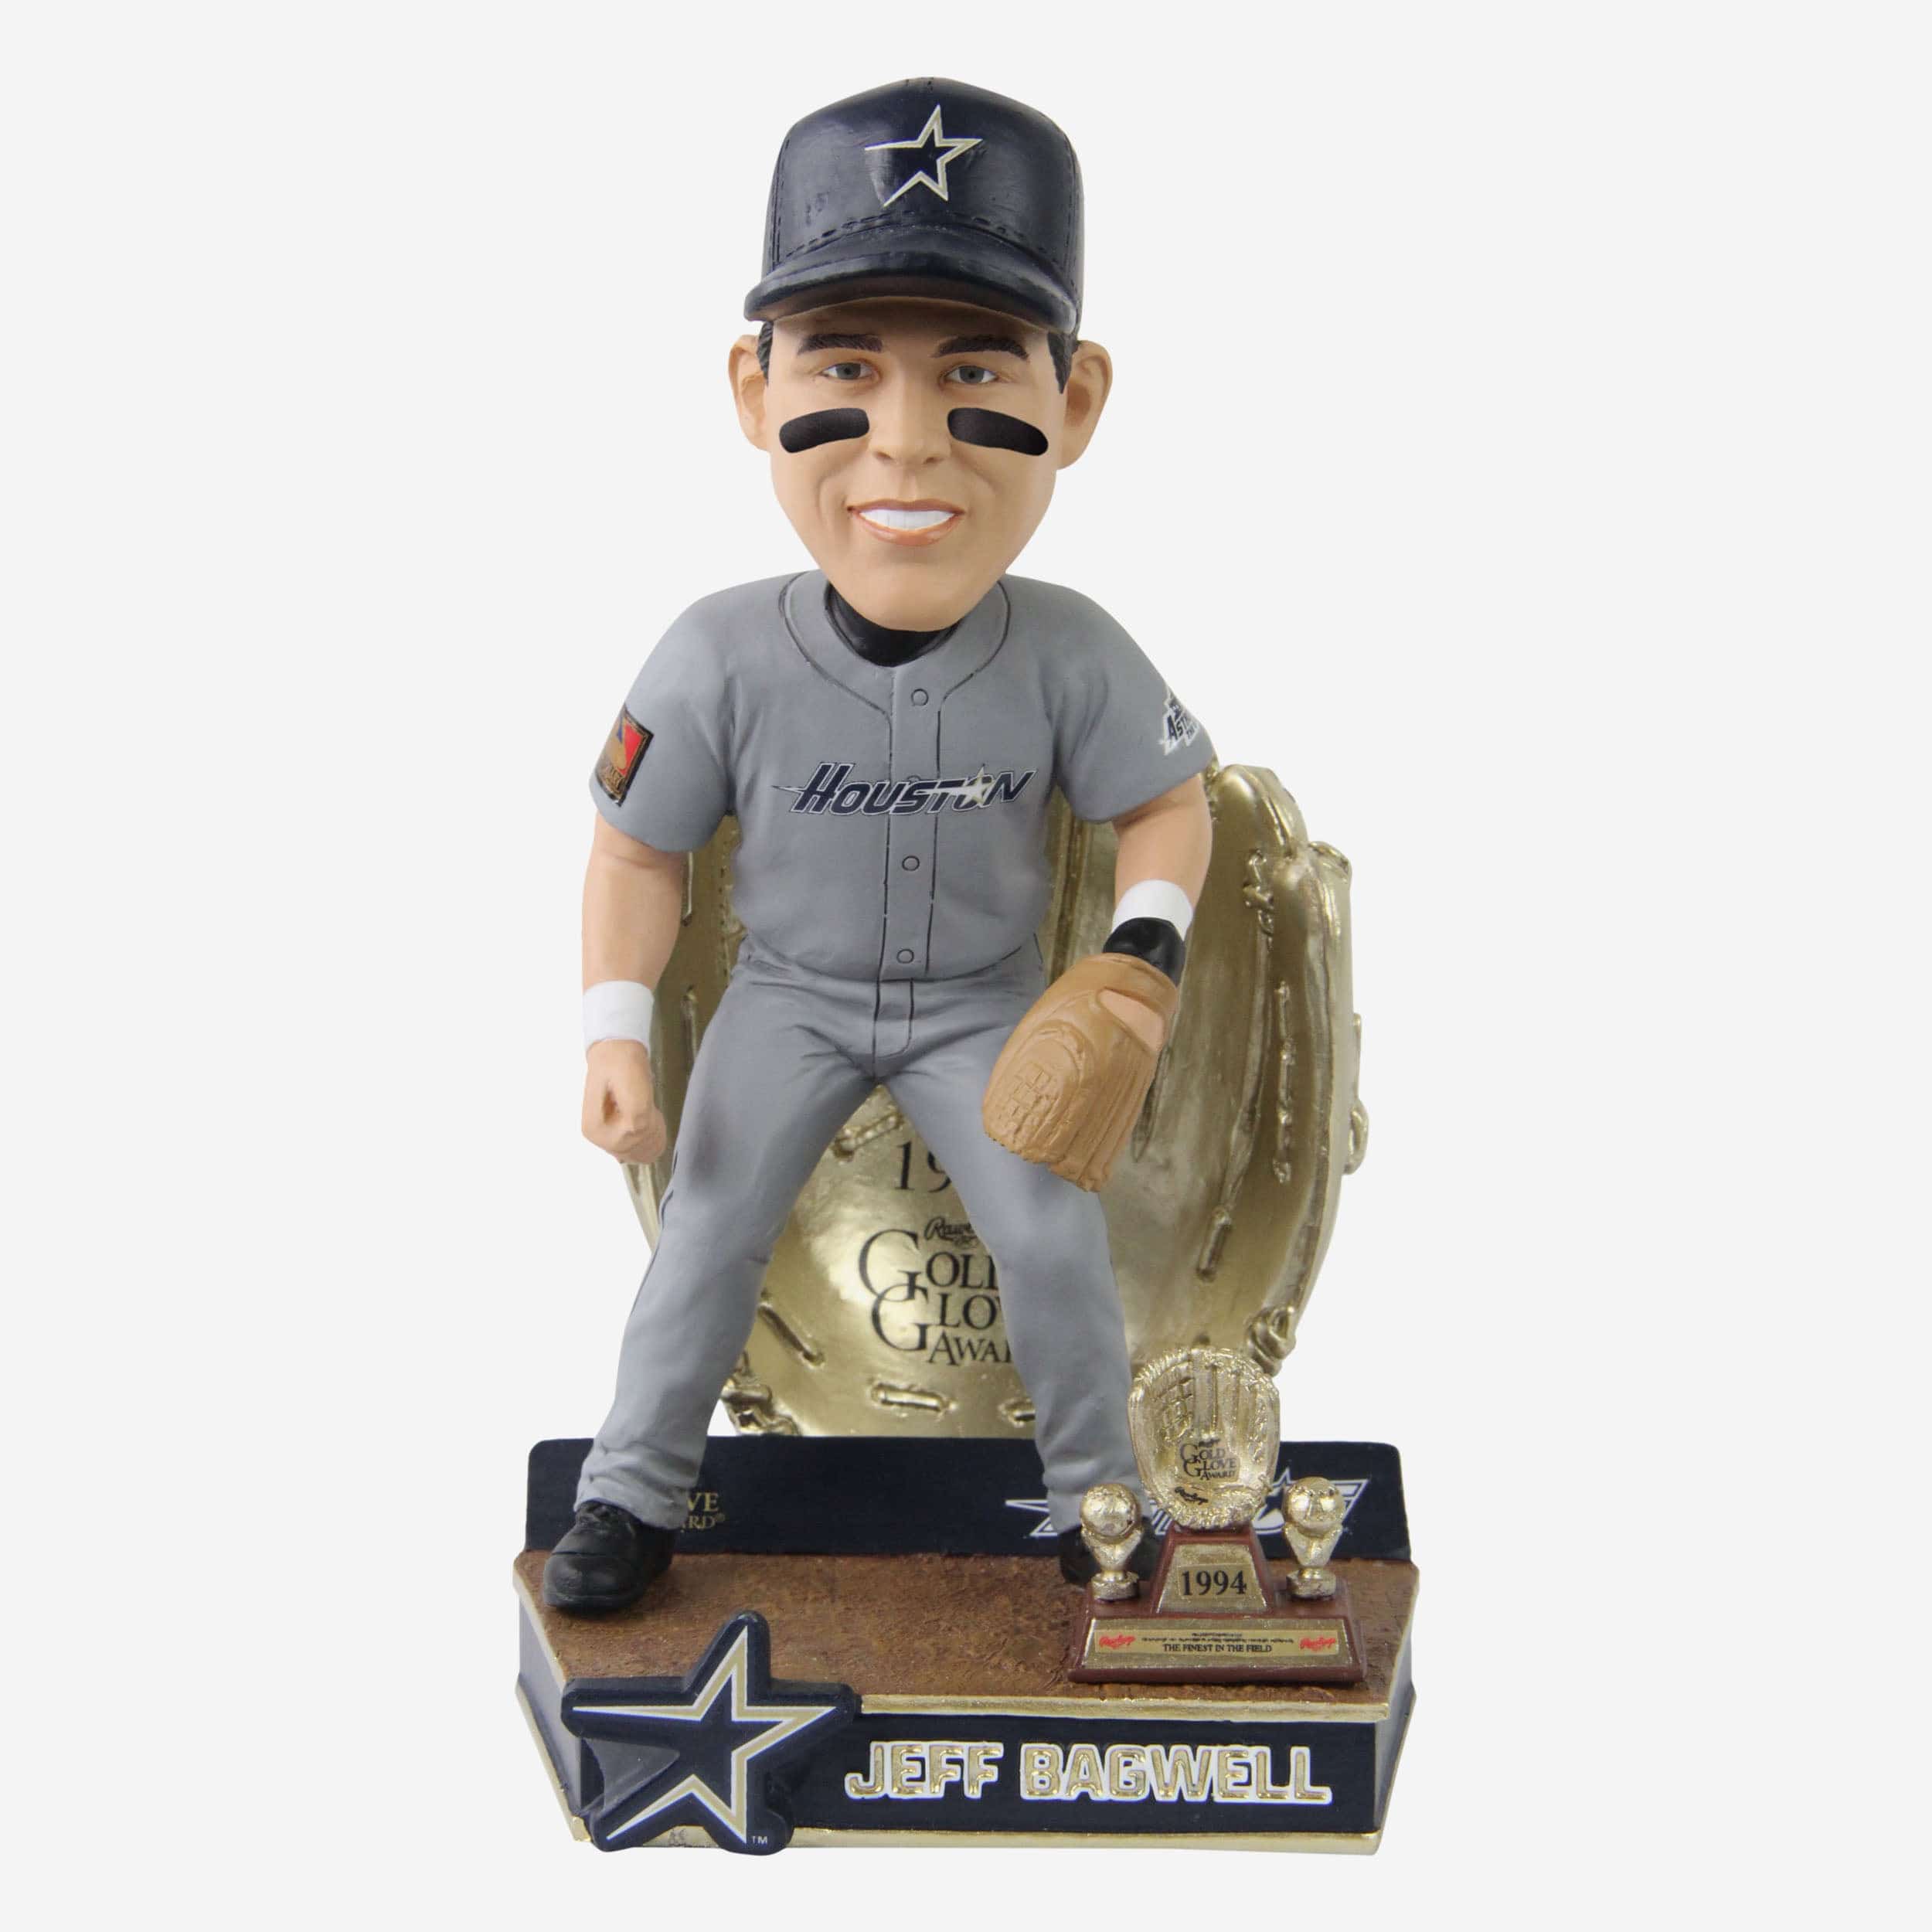 Jeff Bagwell Houston Astros 1994 Gold Glove Bobblehead Officially Licensed by MLB